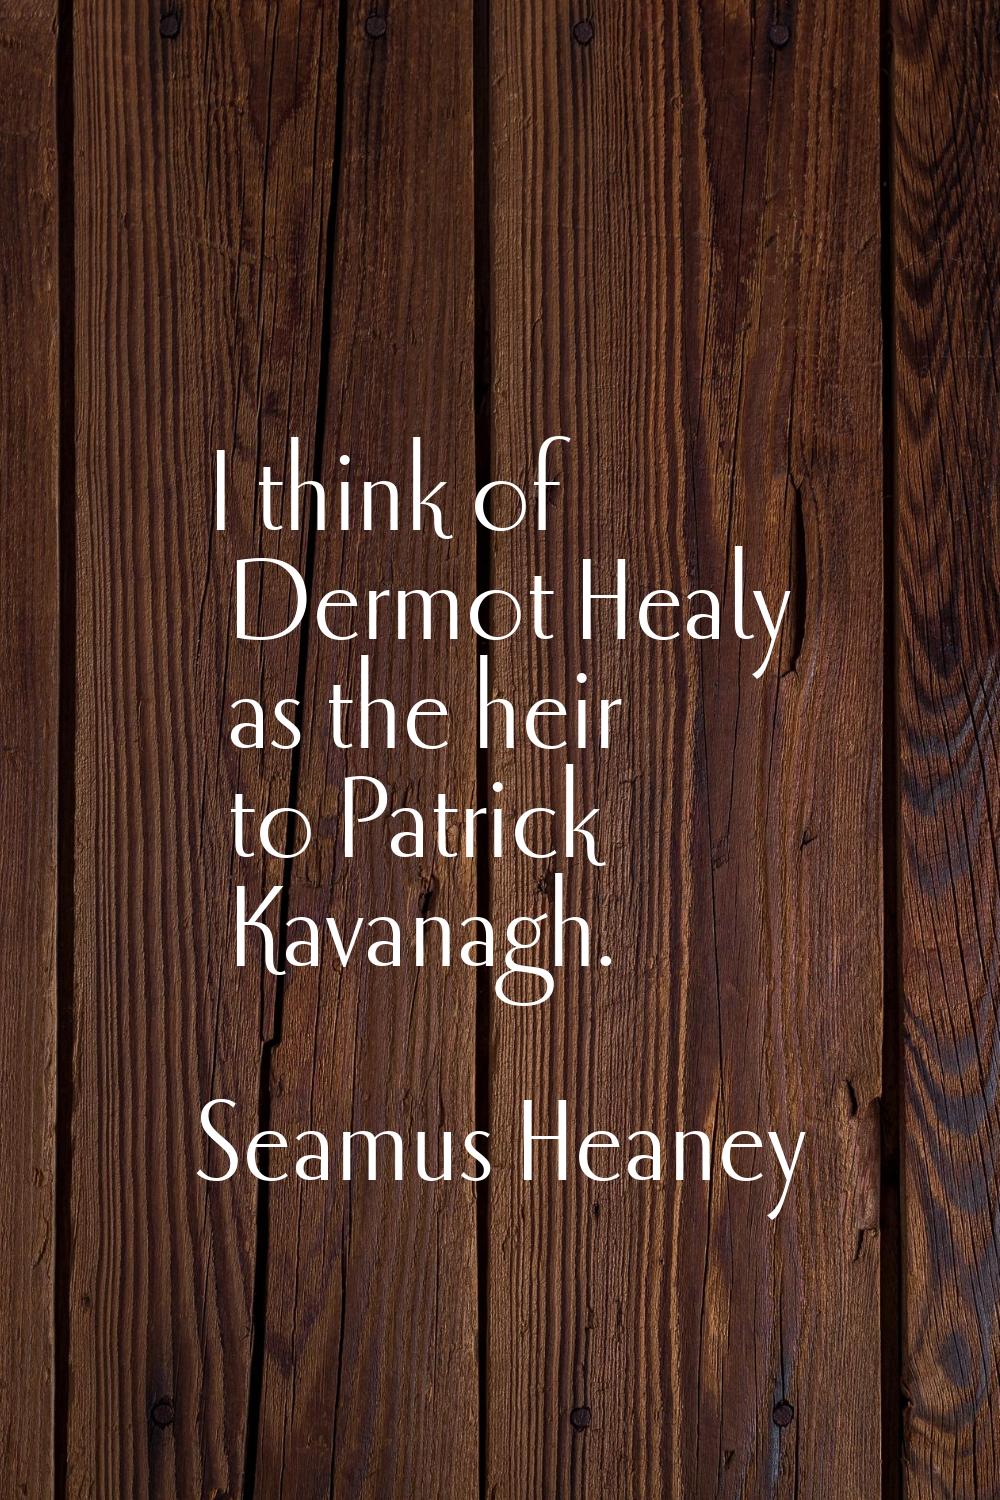 I think of Dermot Healy as the heir to Patrick Kavanagh.